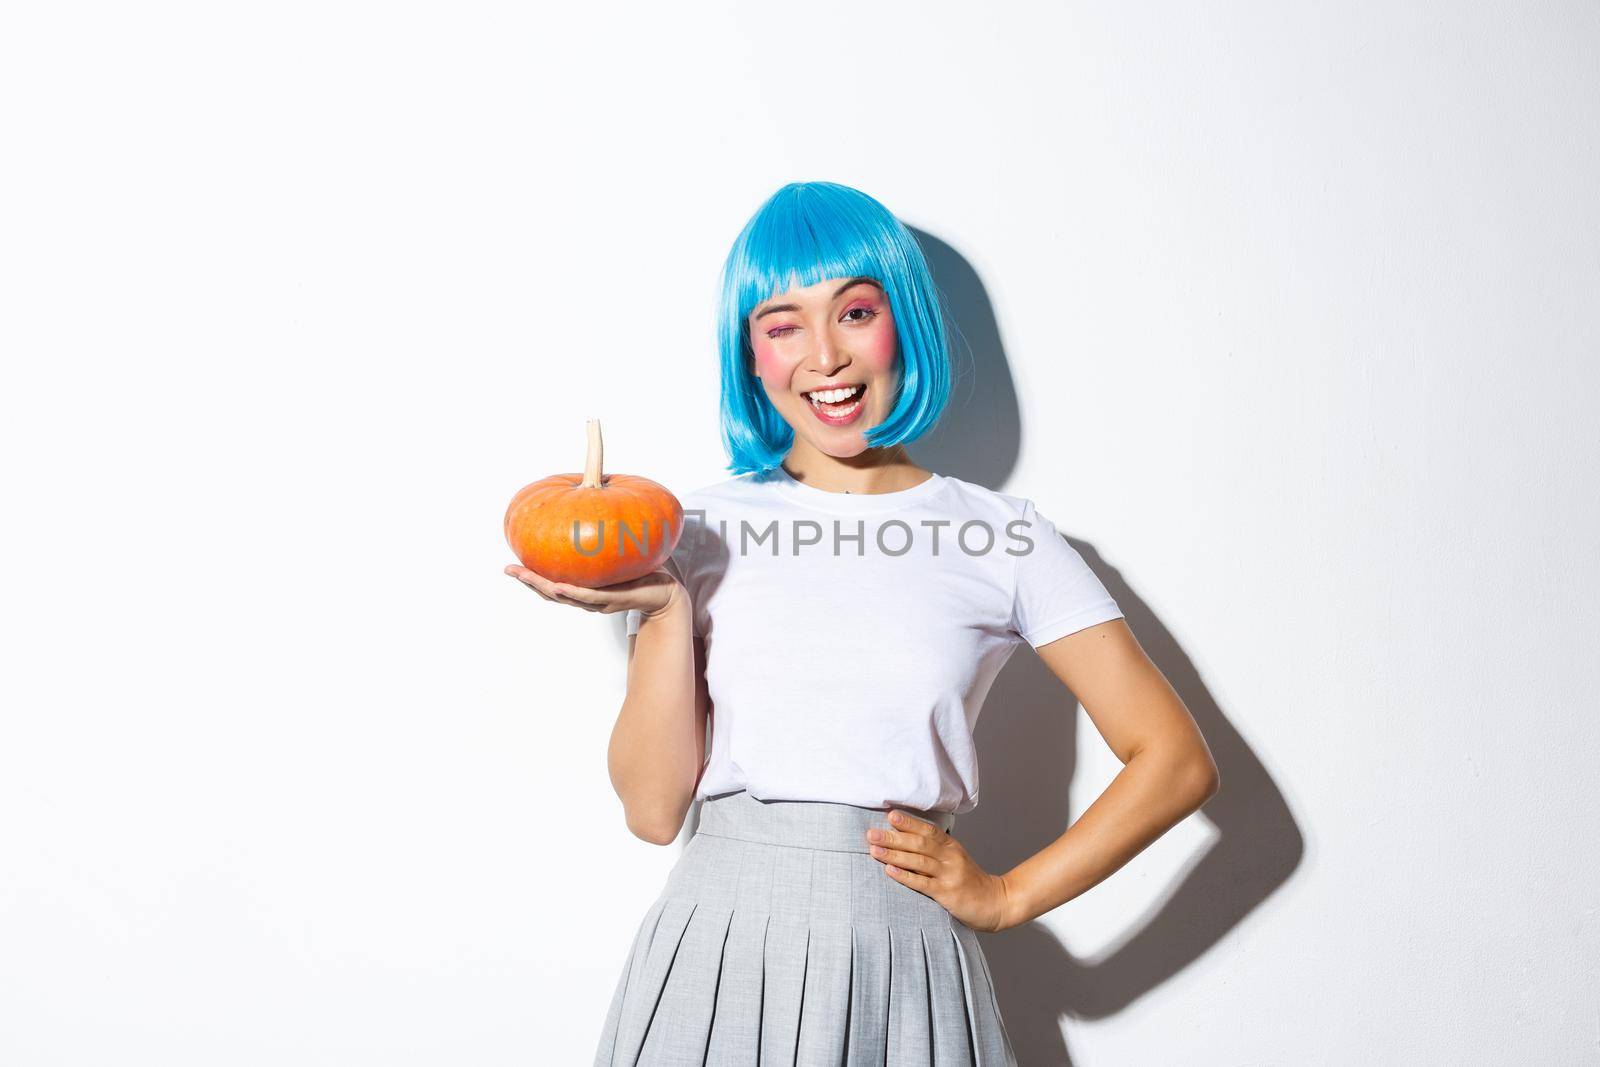 Portrait of coquettish asian girl in halloween costume and blue wig, holding cute pumpkin and winking at camera with happy expression, standing over white background.